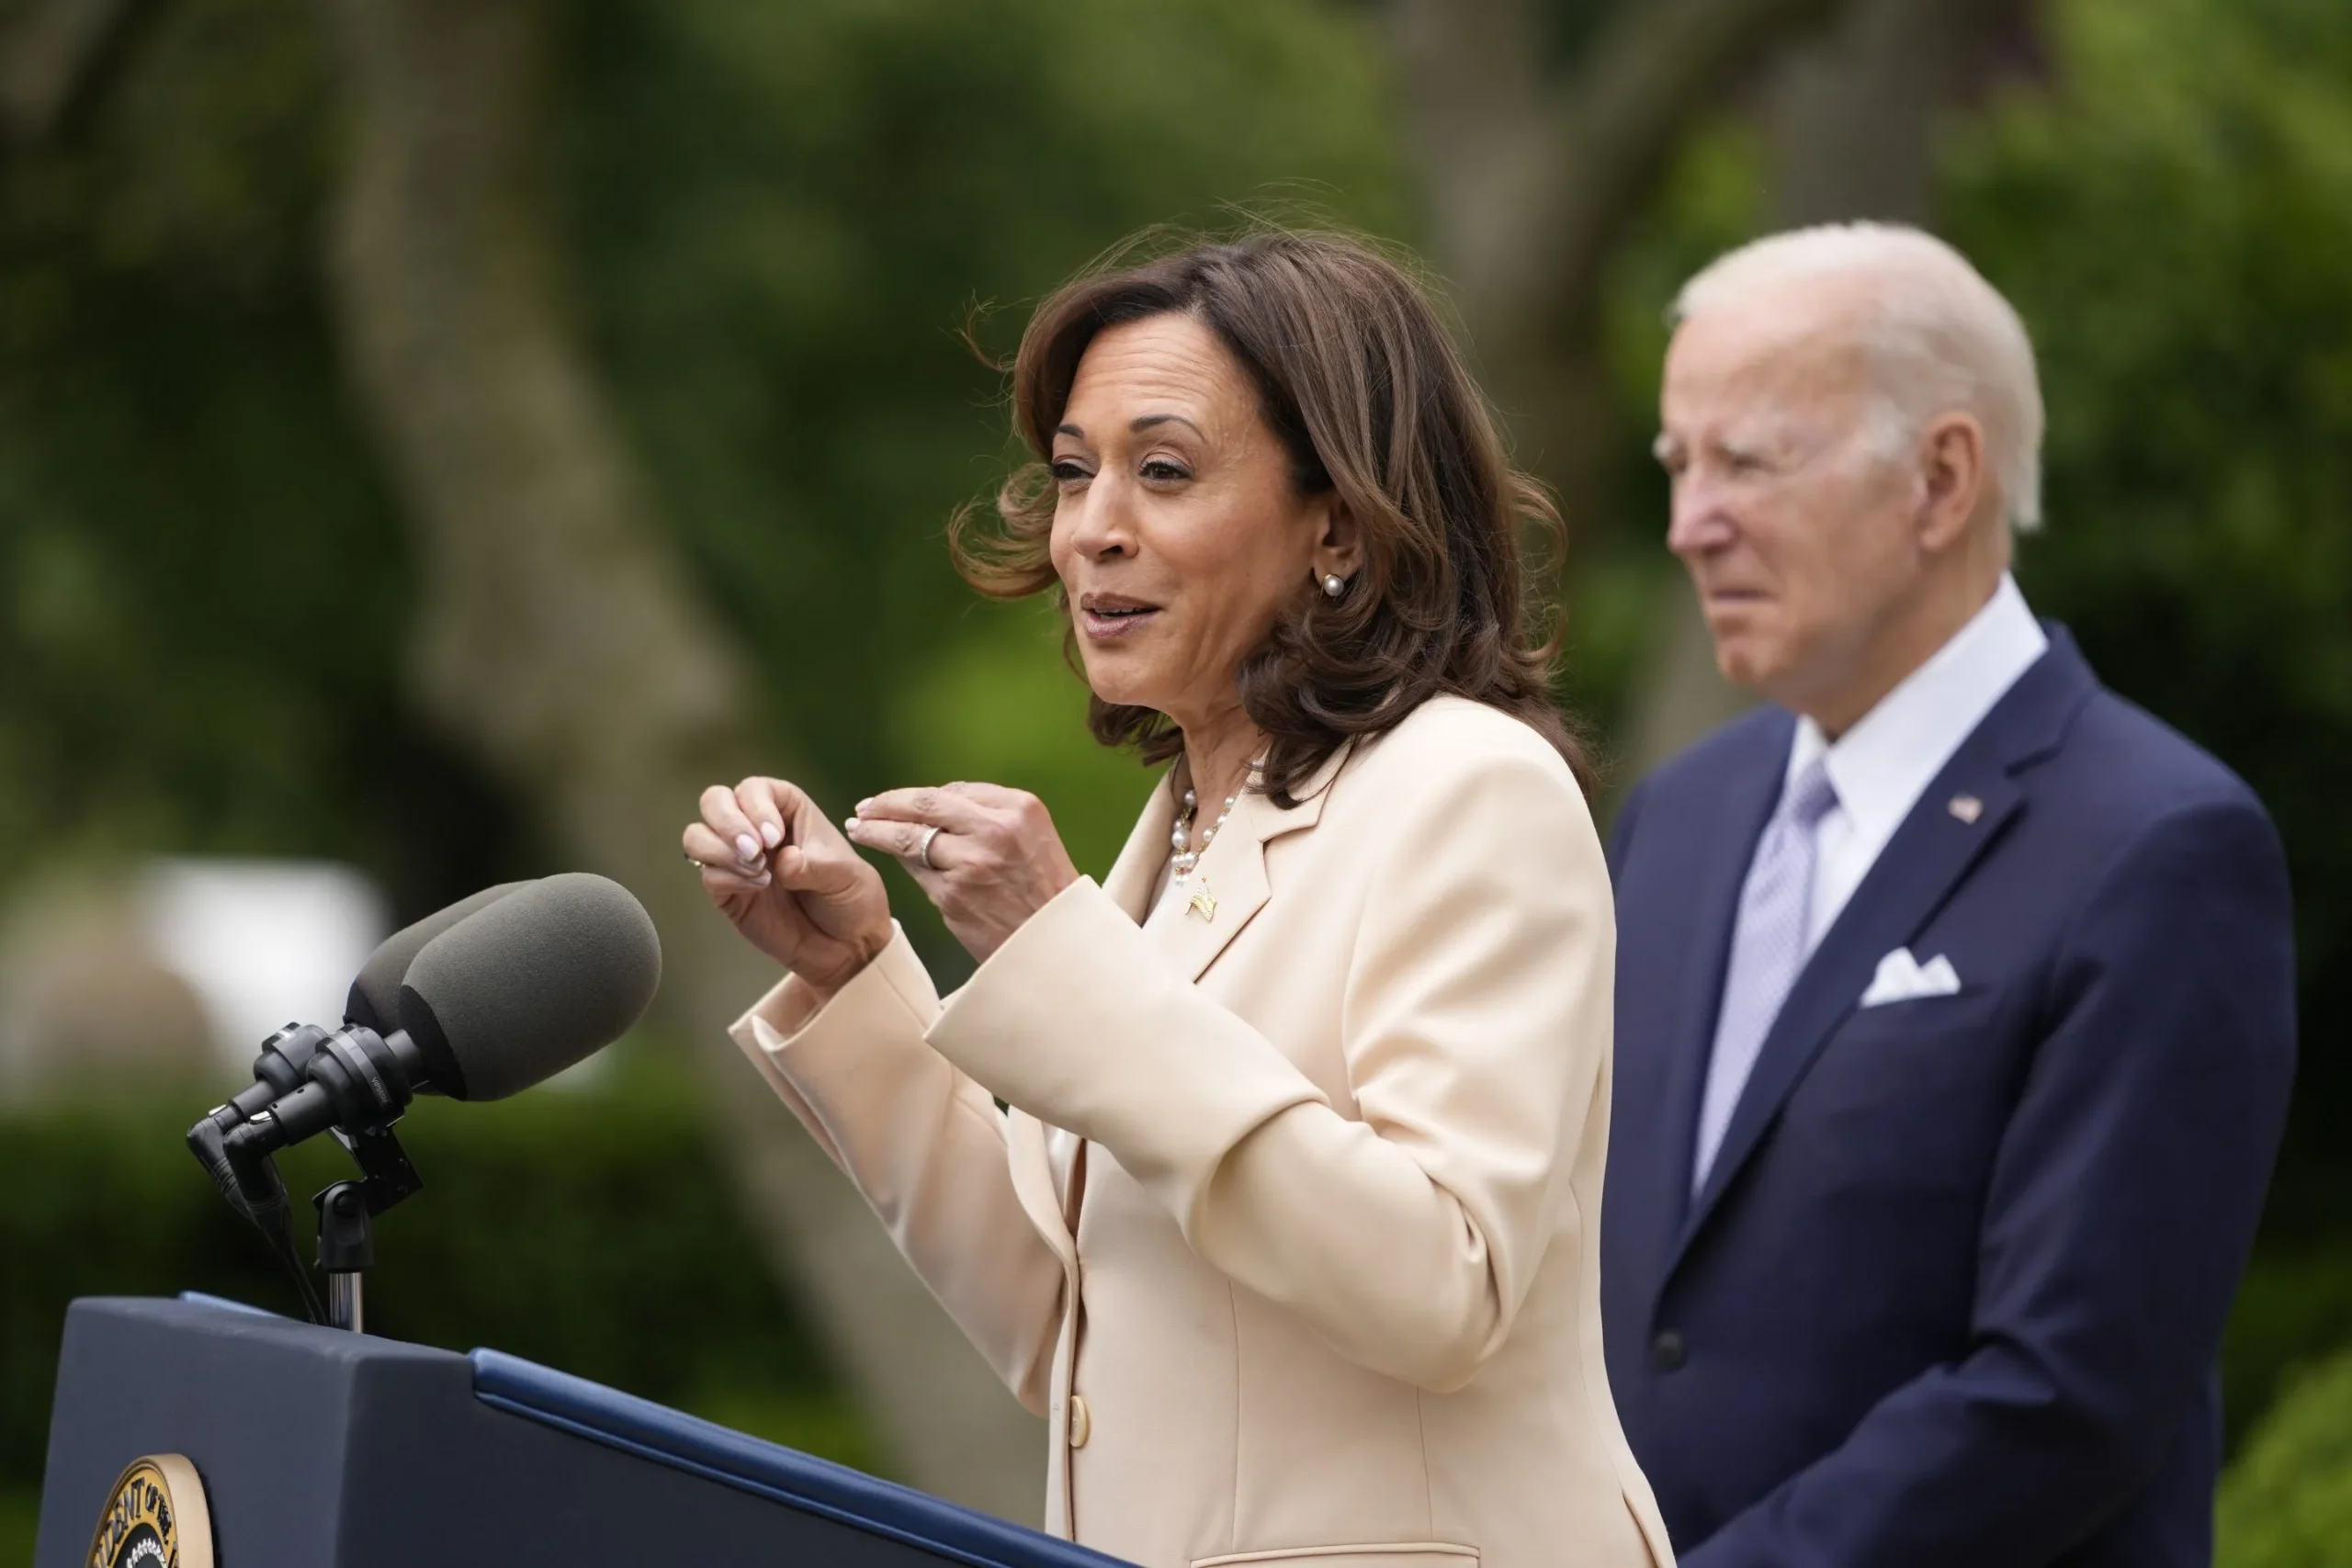 Vice President diverges from Biden, asserts leadership on key issues (Credits: AP Photo)